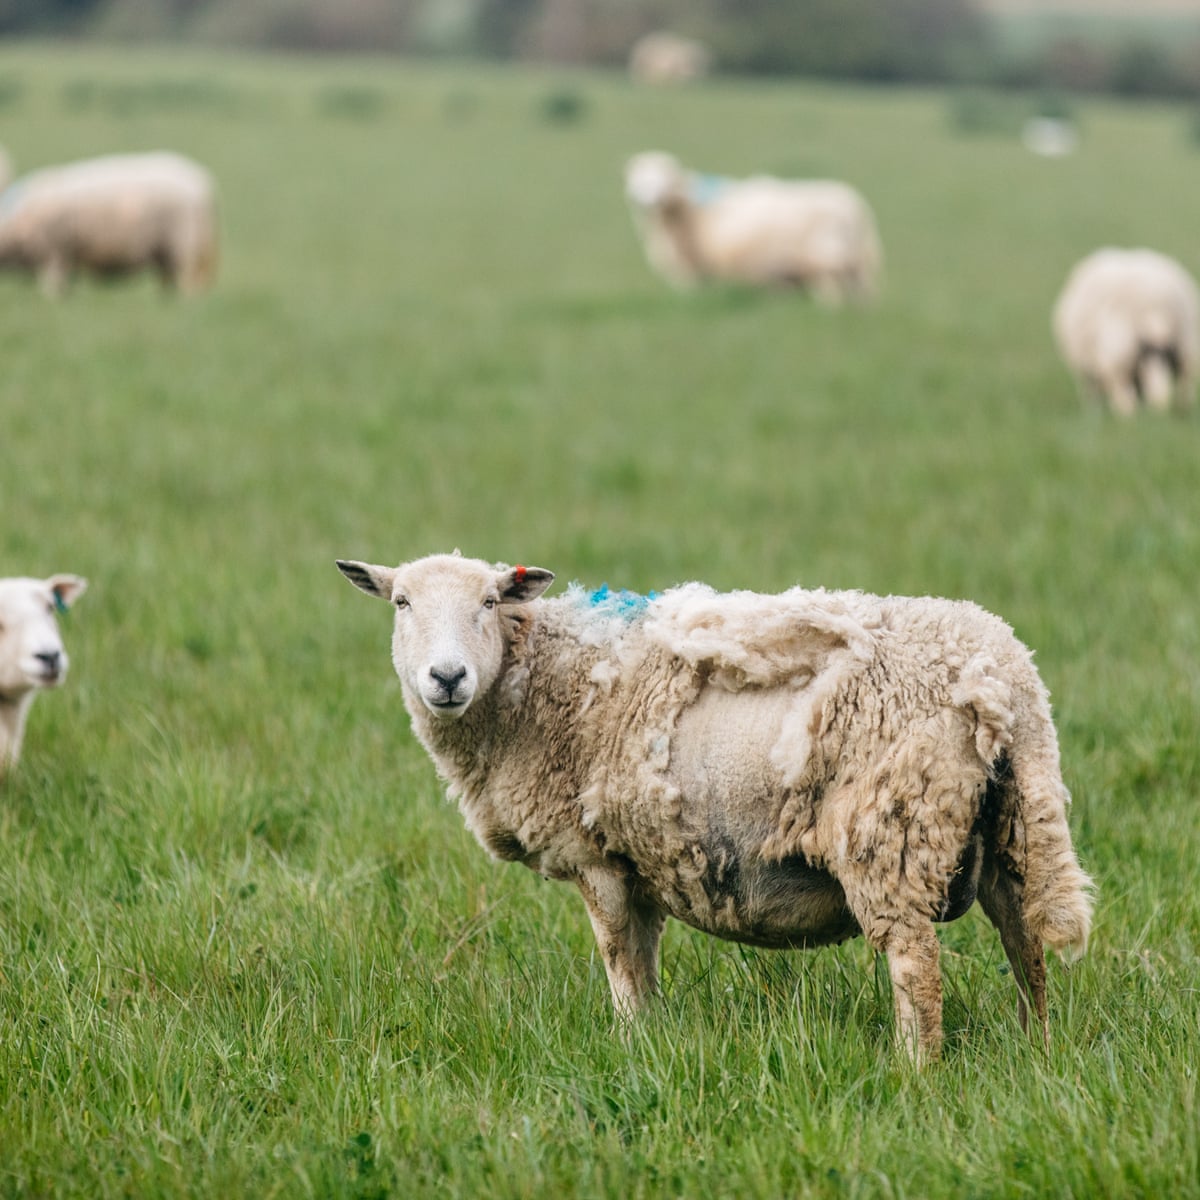 Shear desperation: low price of wool pushes farmers to opt for moulting  sheep | Farming | The Guardian